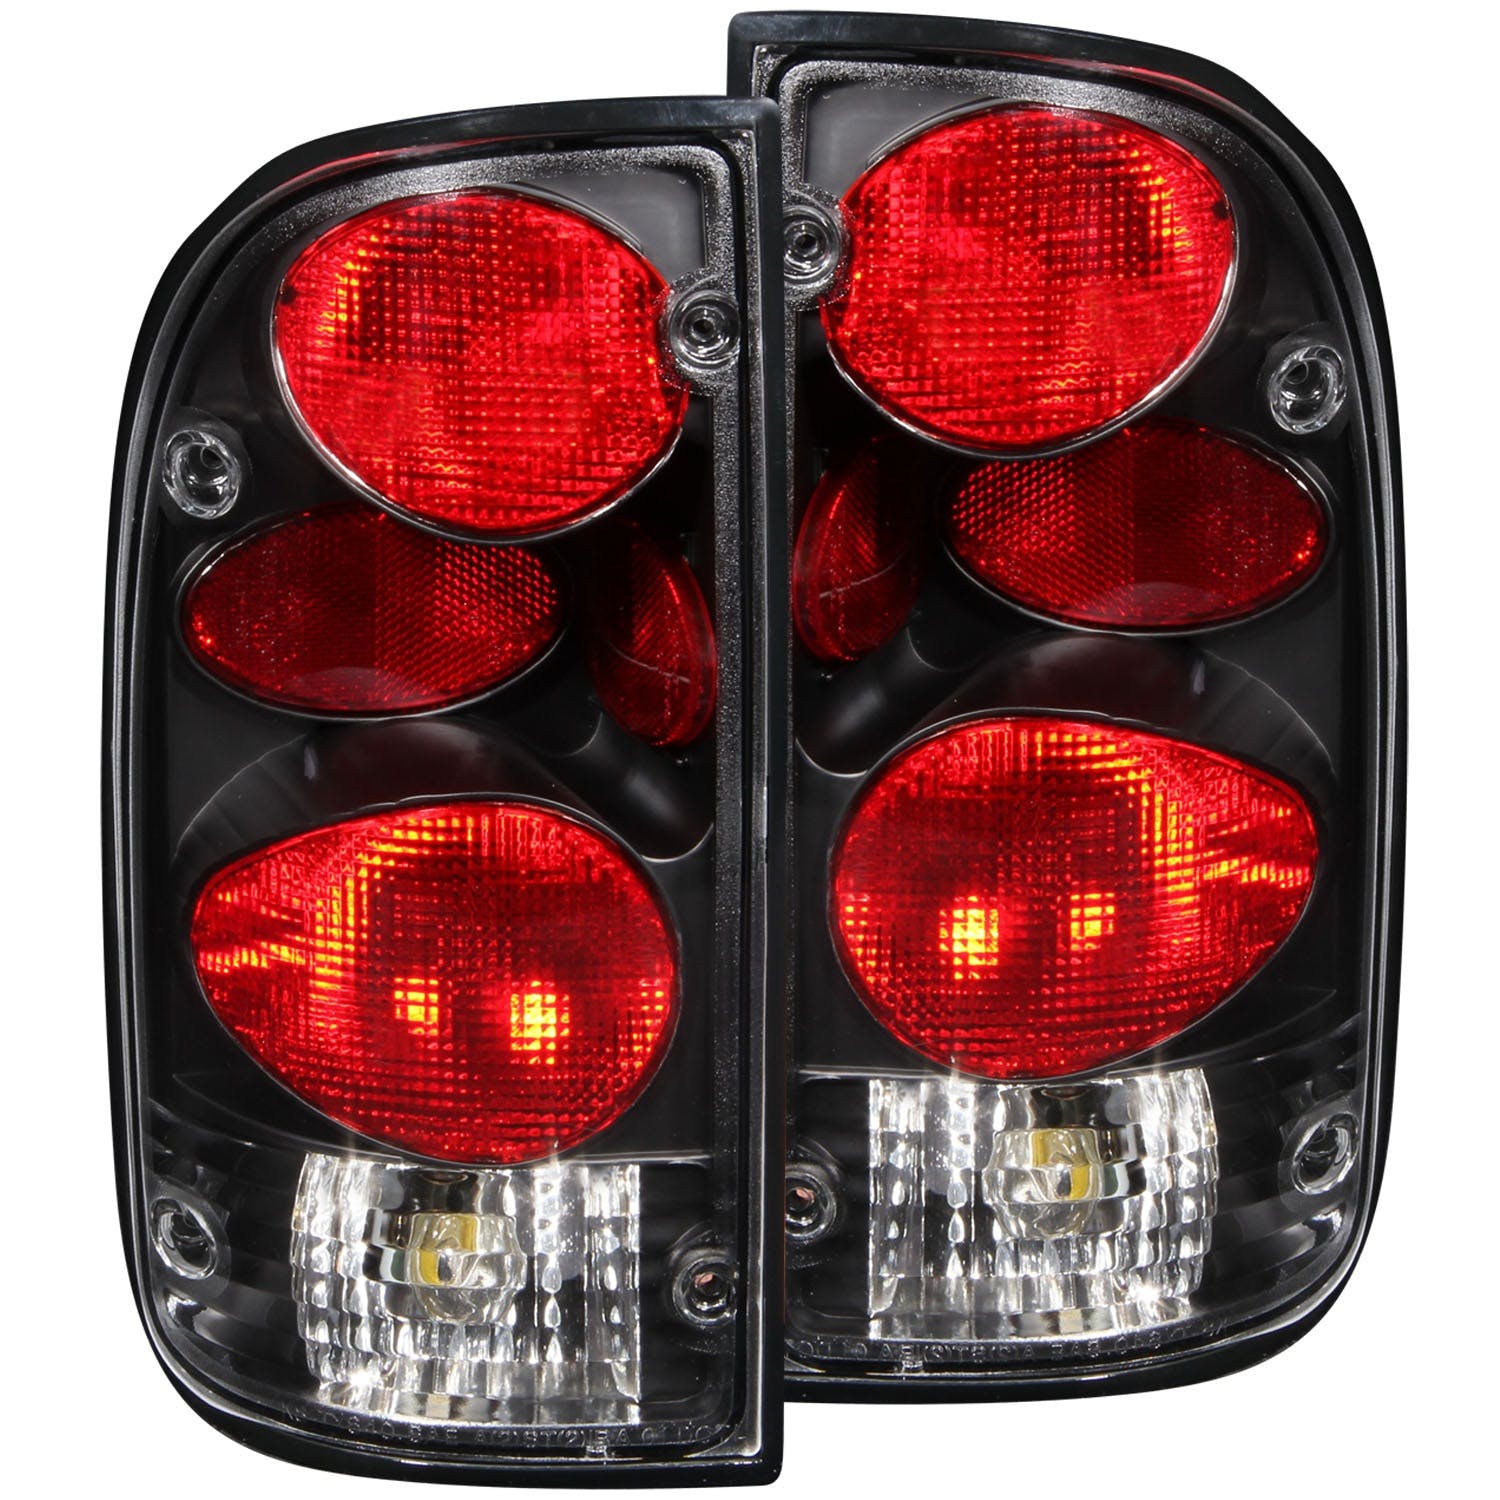 AnzoUSA 211129 Taillights Black